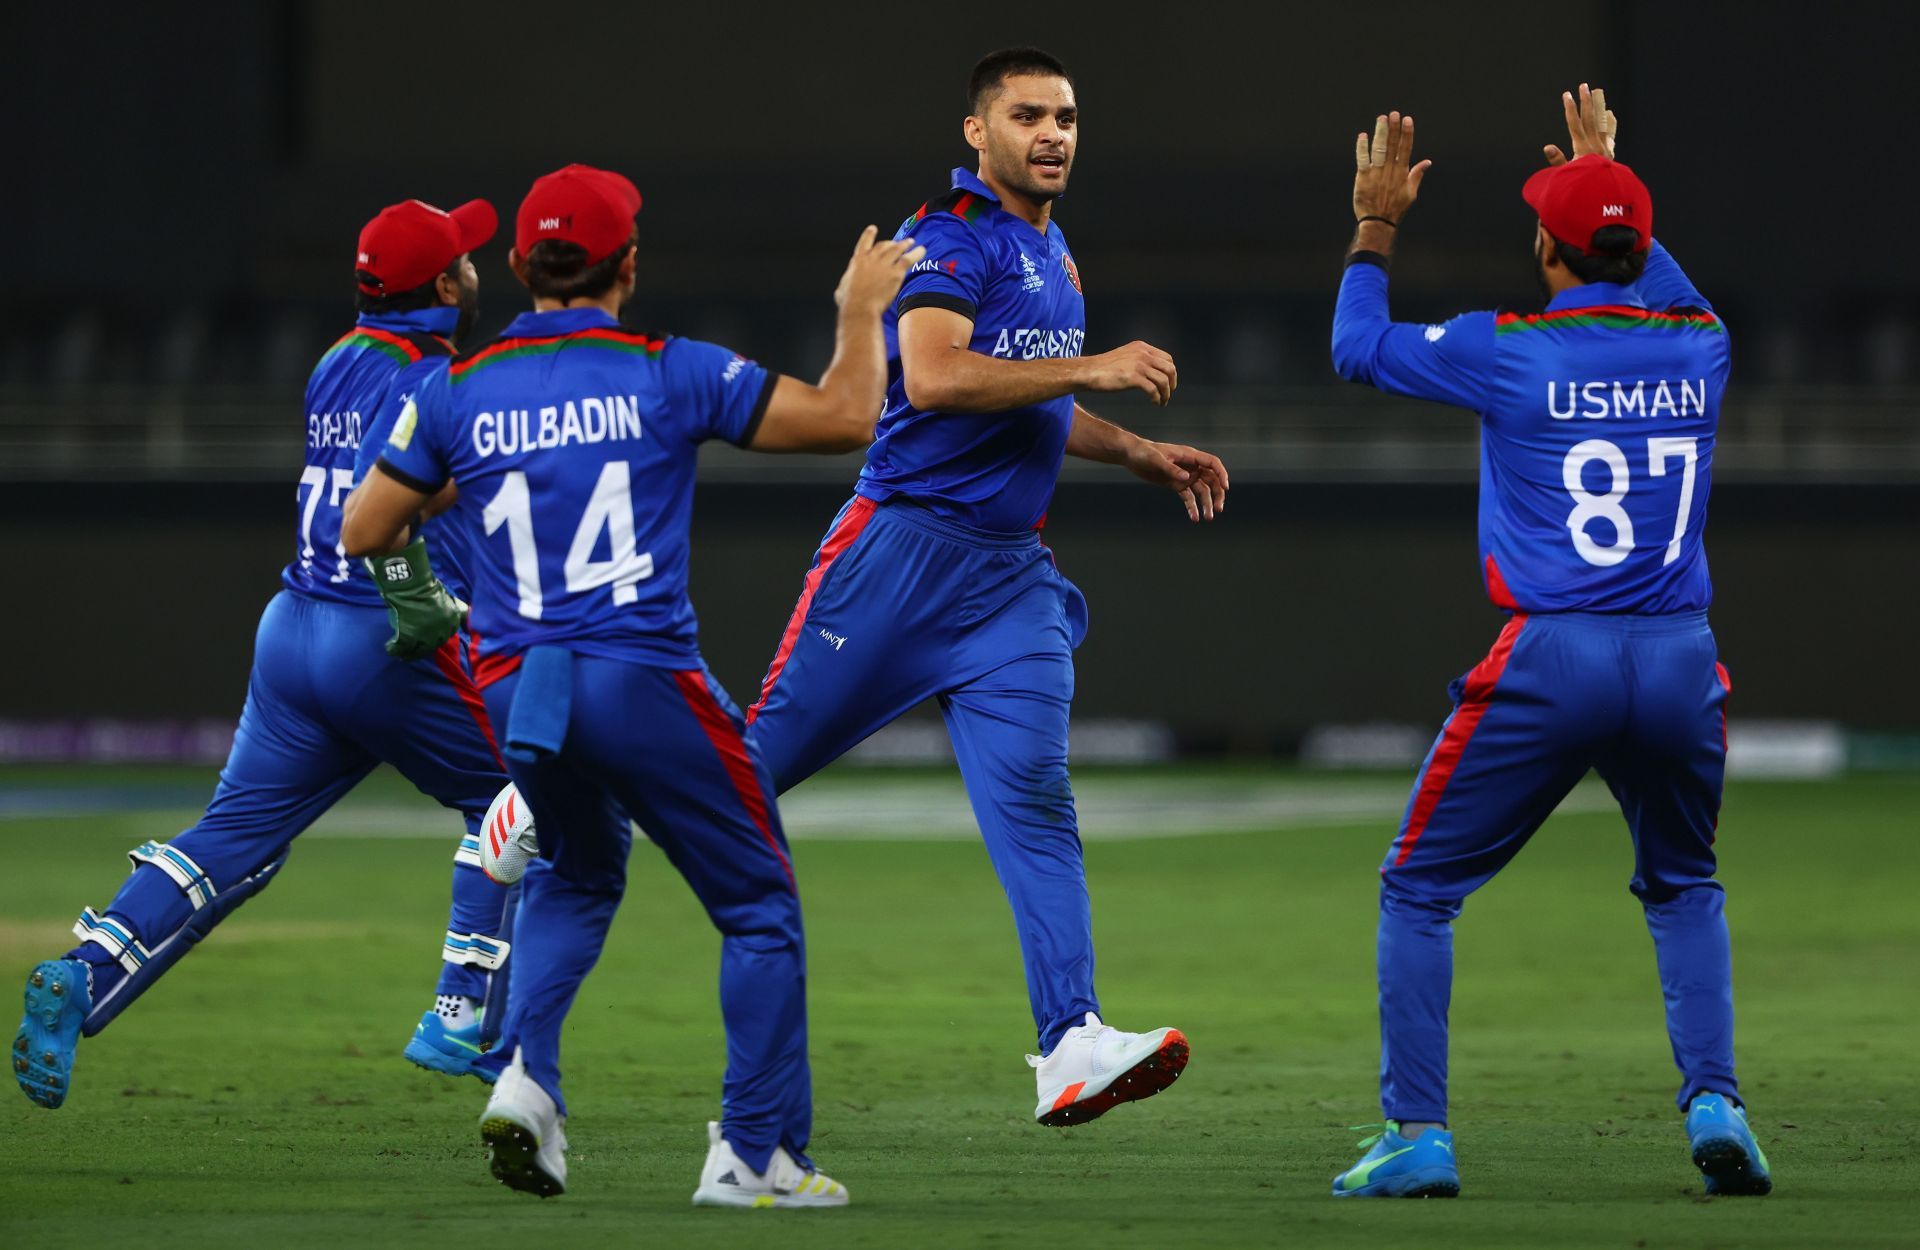 The Mohammad Nabi-led outfit will start as favorites to win the Afghanistan vs Namibia T20 World Cup 2021 mach